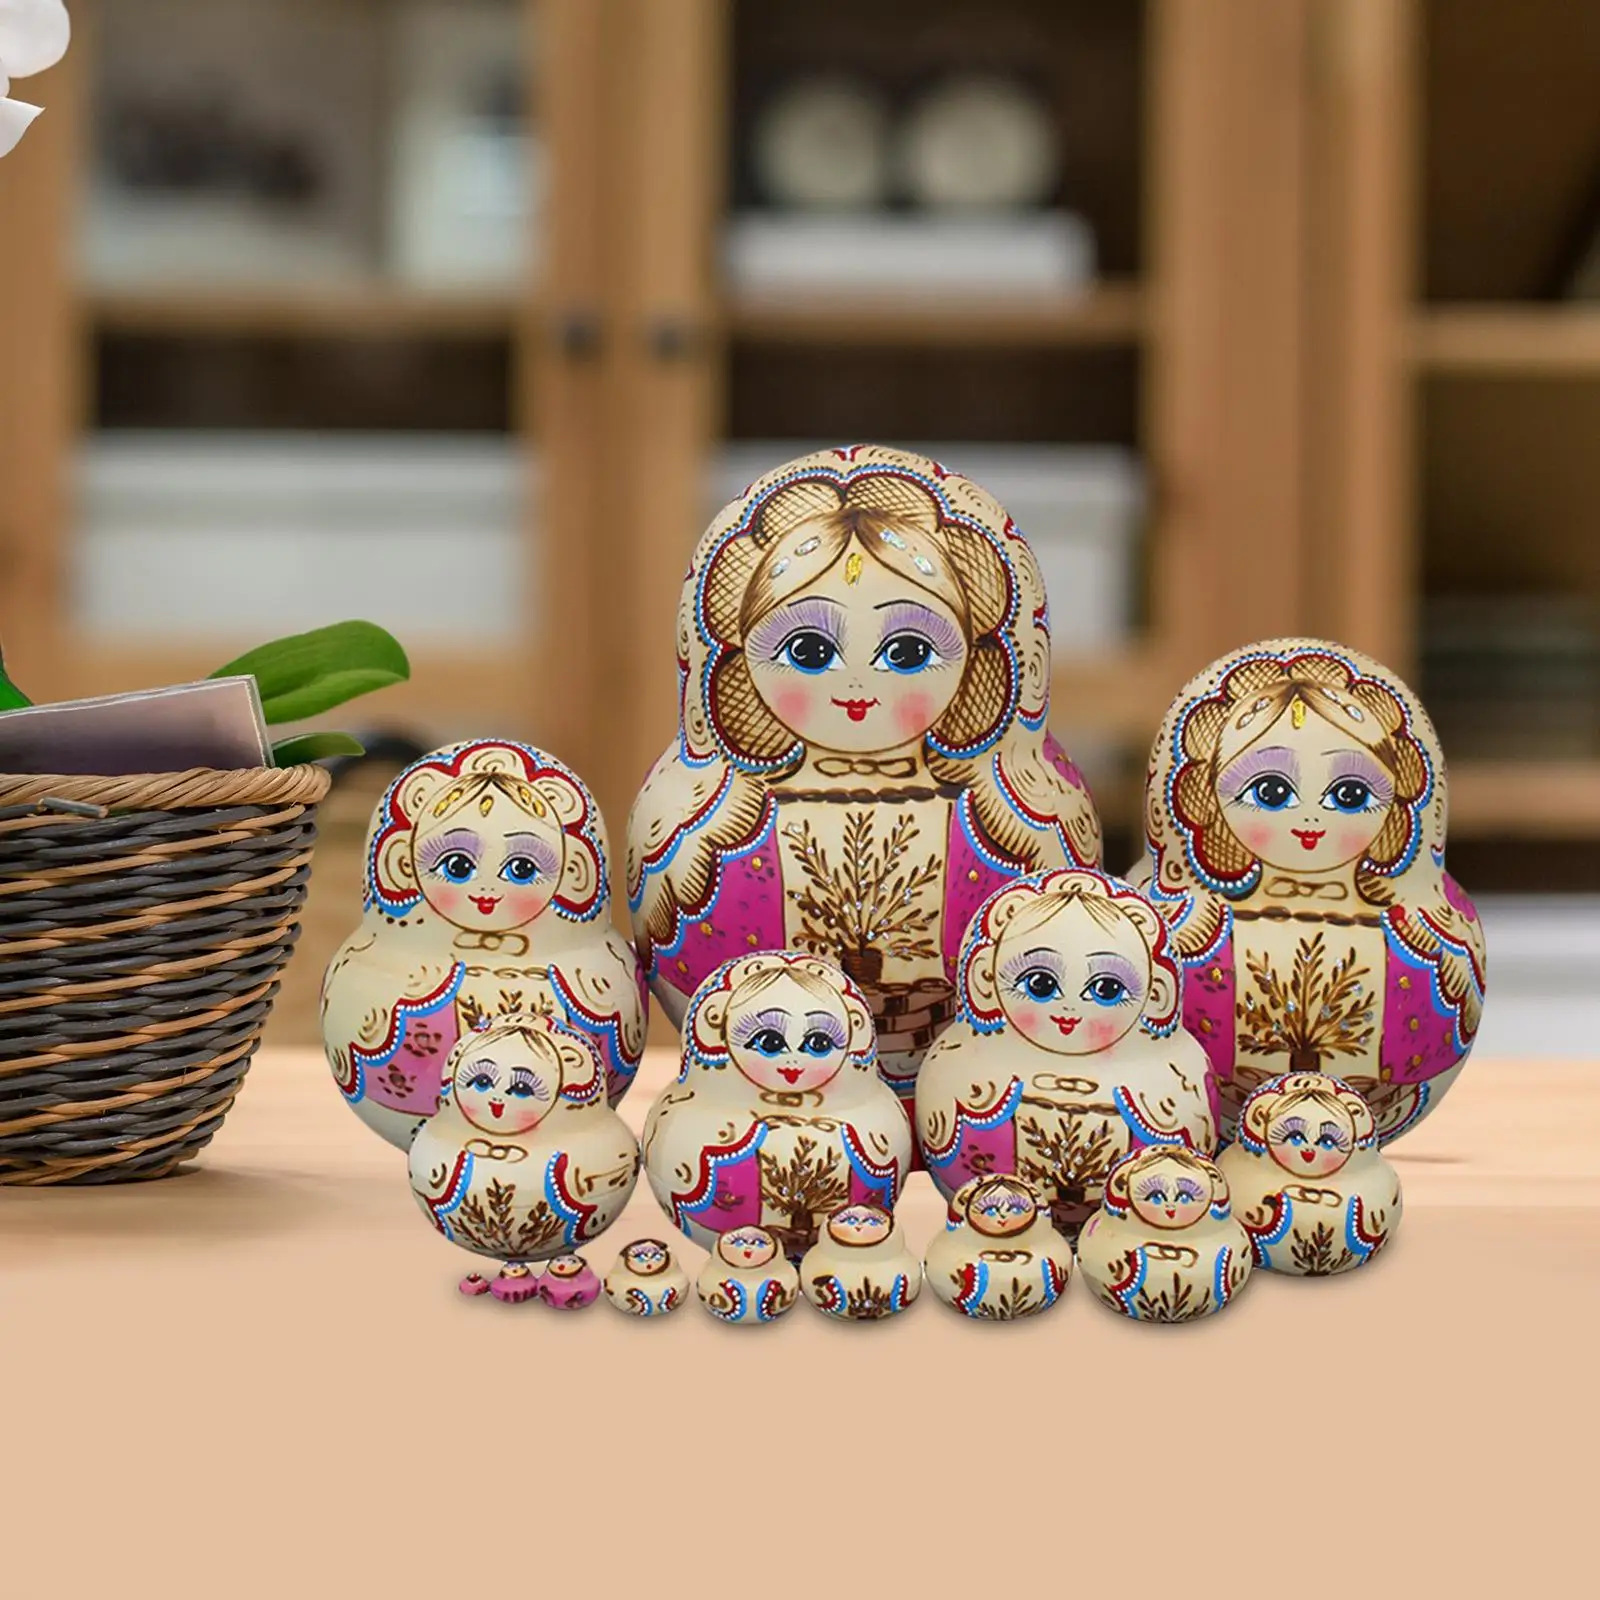 15Pcs Handmade Nesting Doll Stacking Ornament Figures Collectible Crafts Wooden Matryoshka Dolls for Home